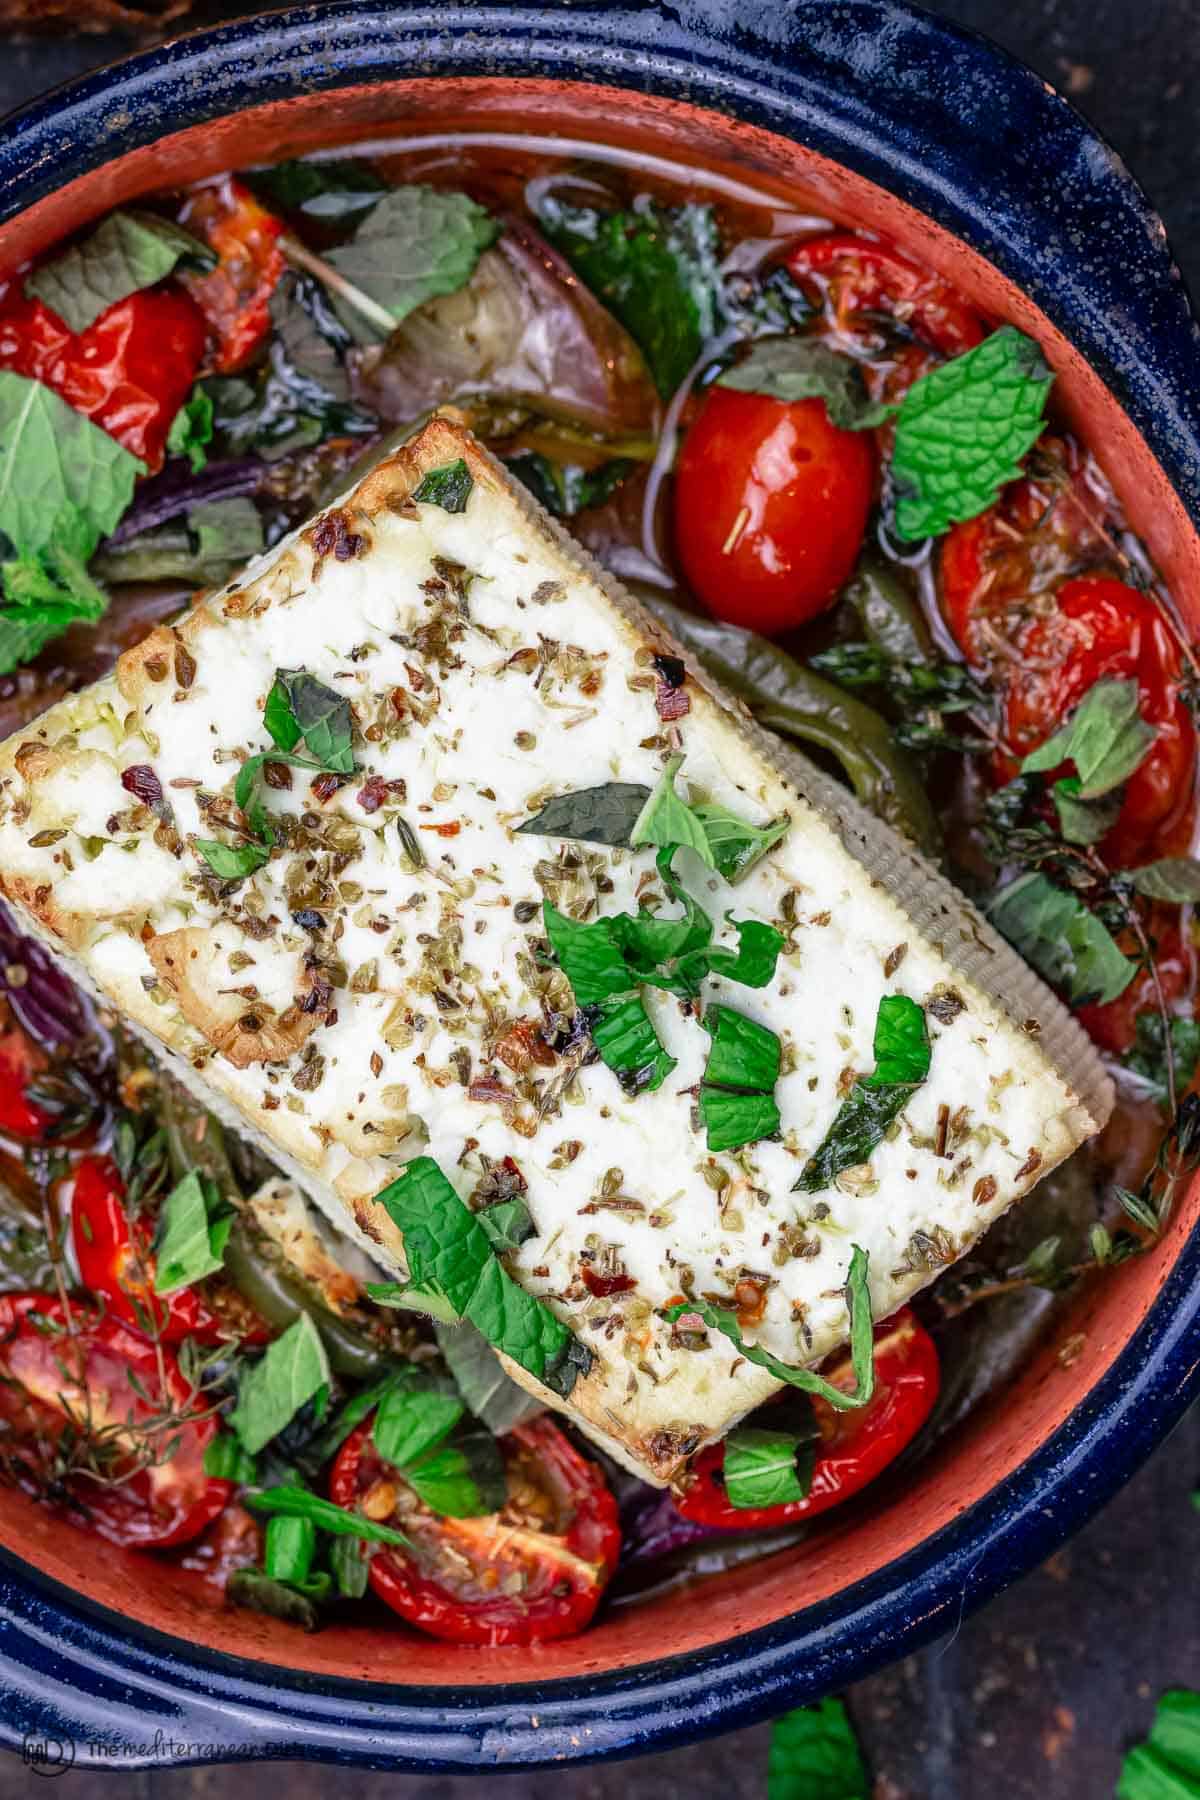 Baked feta with tomatoes, peppers and herbs